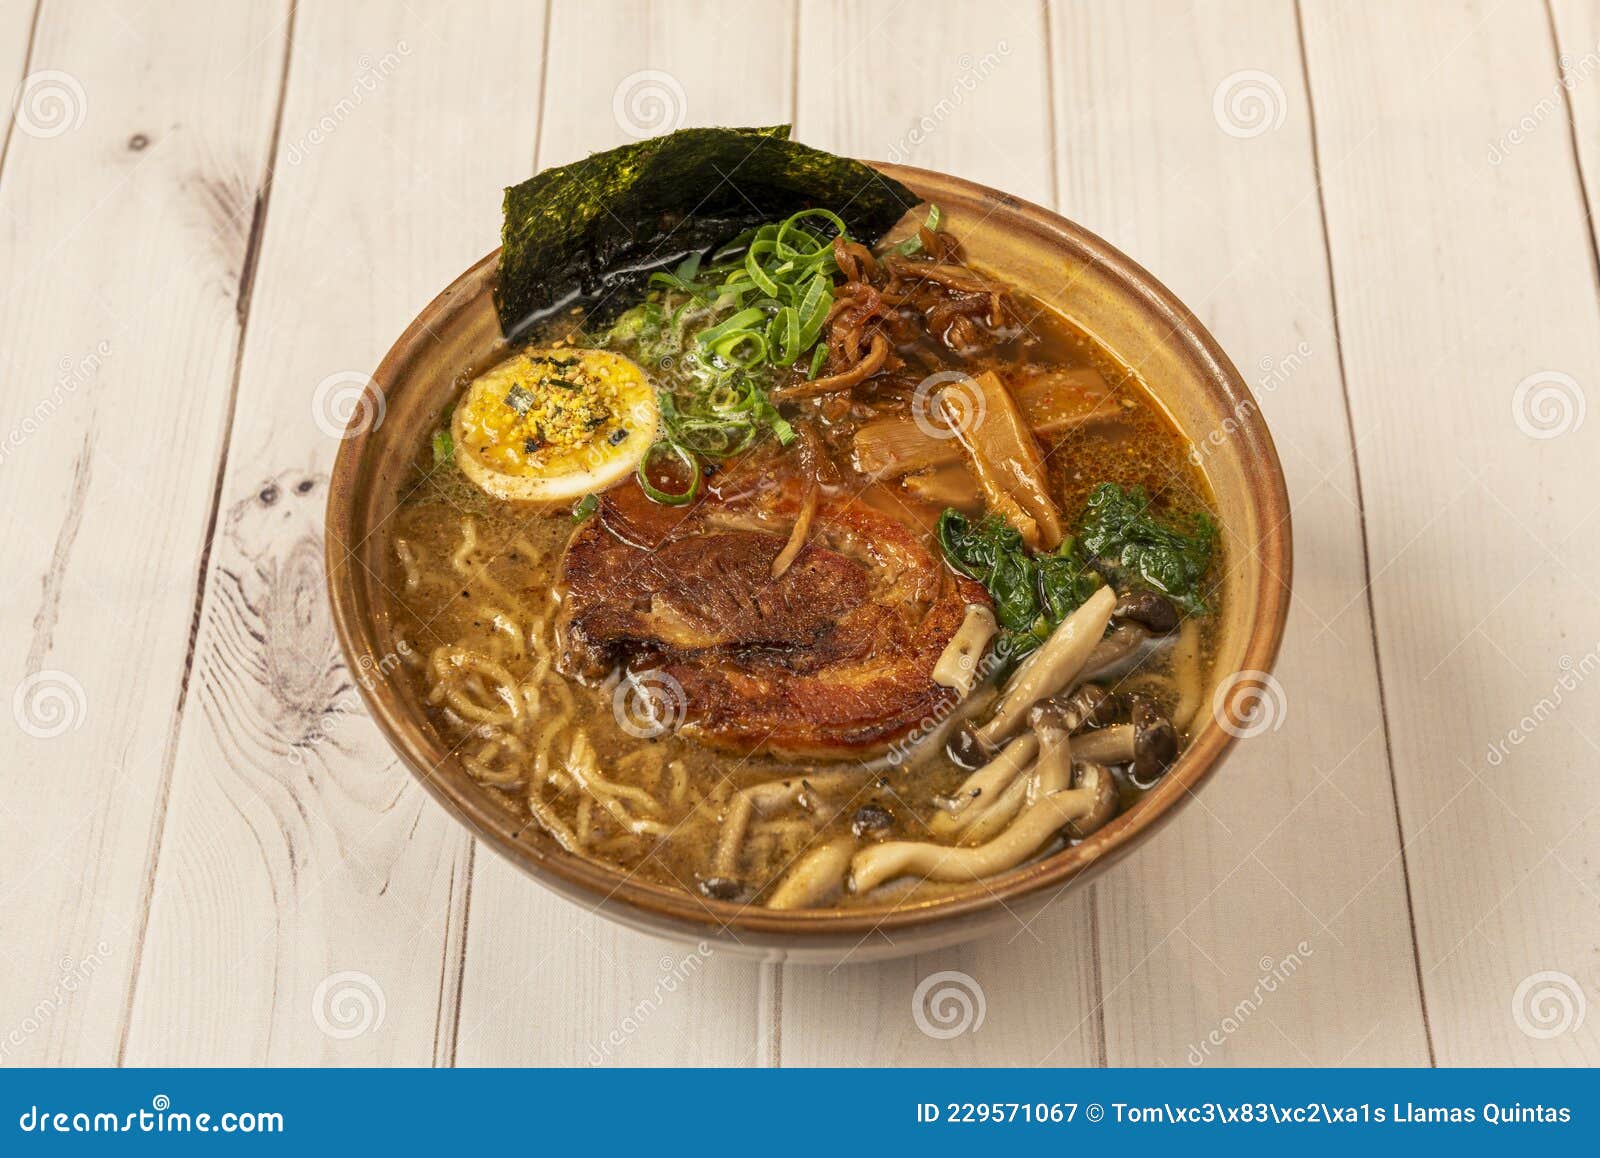 tokio ramen with meat, noodles, mushrooms and seaweed cooked